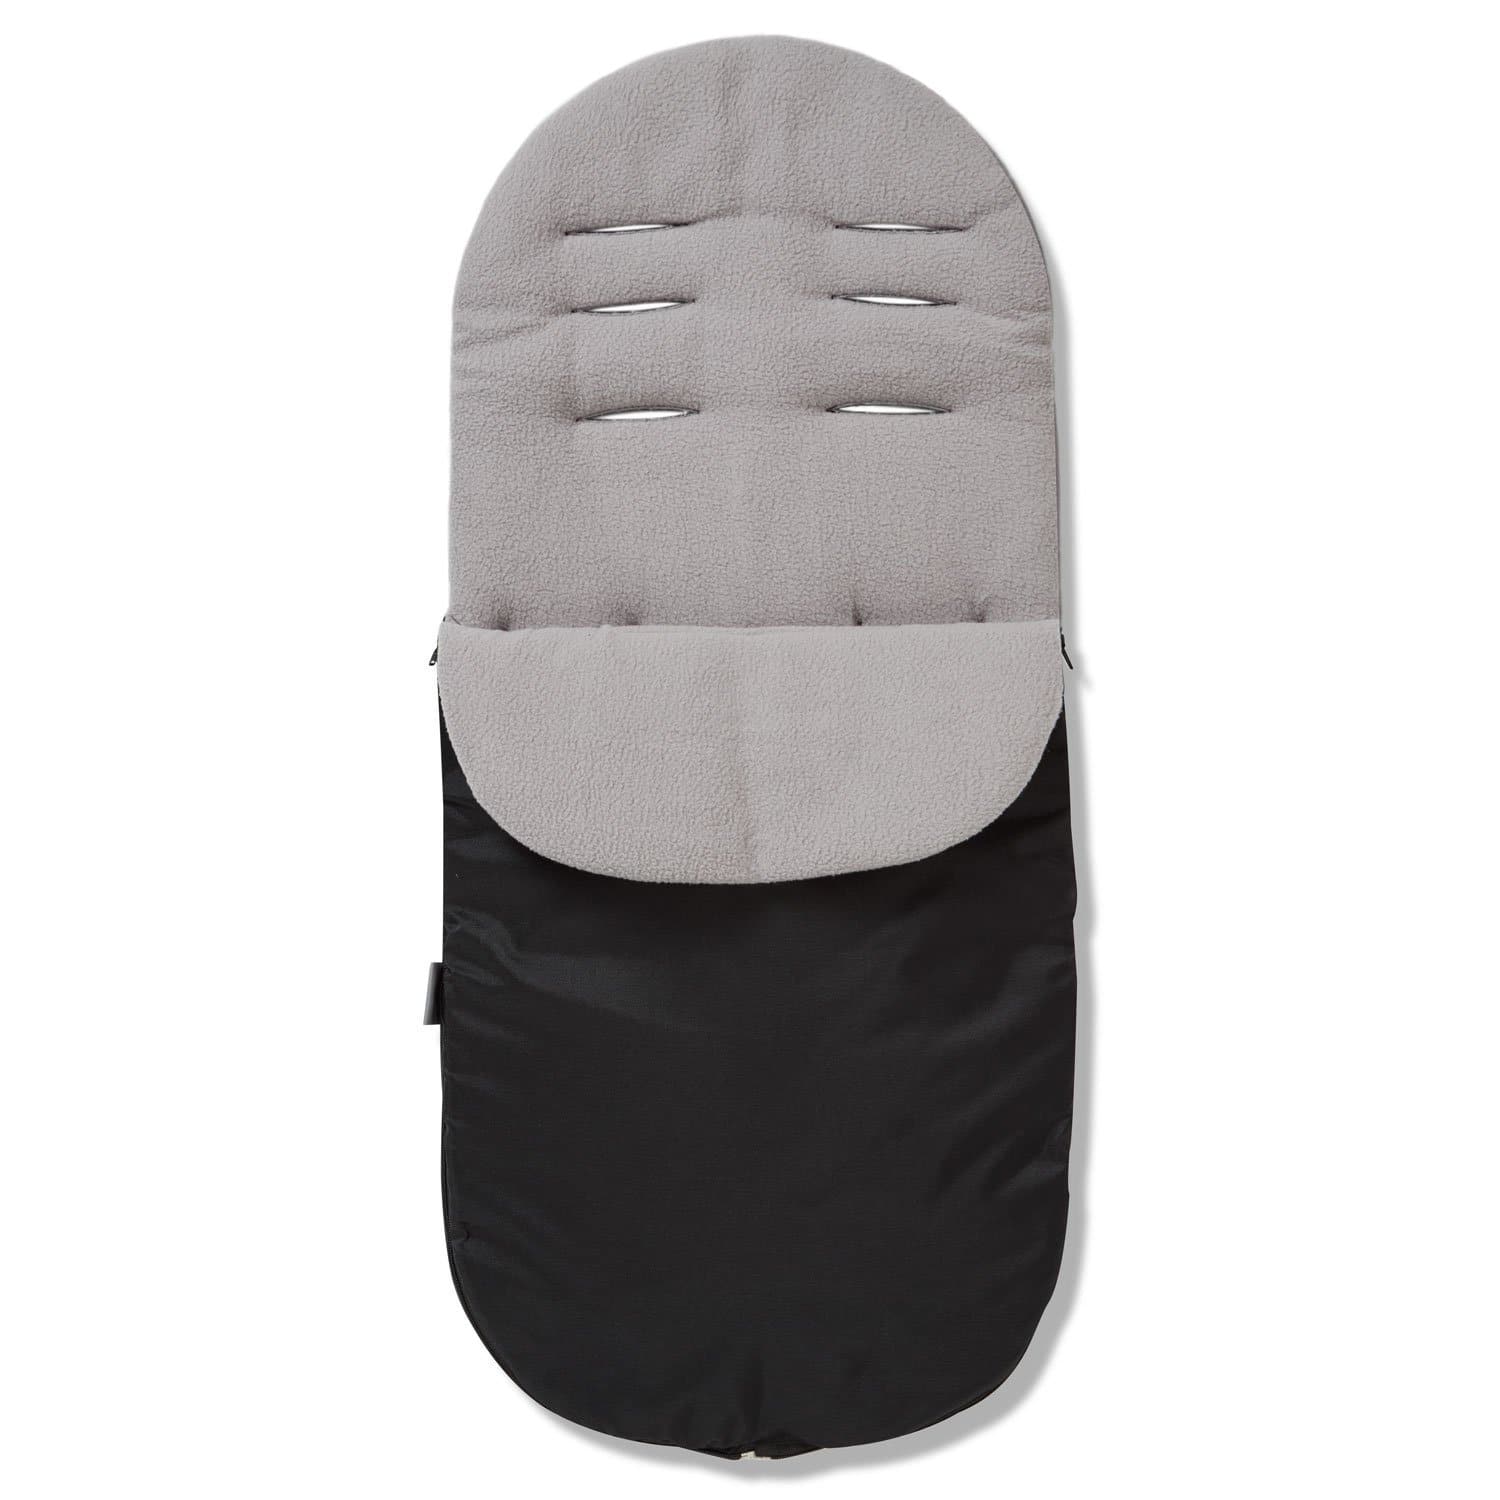 Footmuff / Cosy Toes Compatible with Mountain Buggy - Grey / Fits All Models | For Your Little One